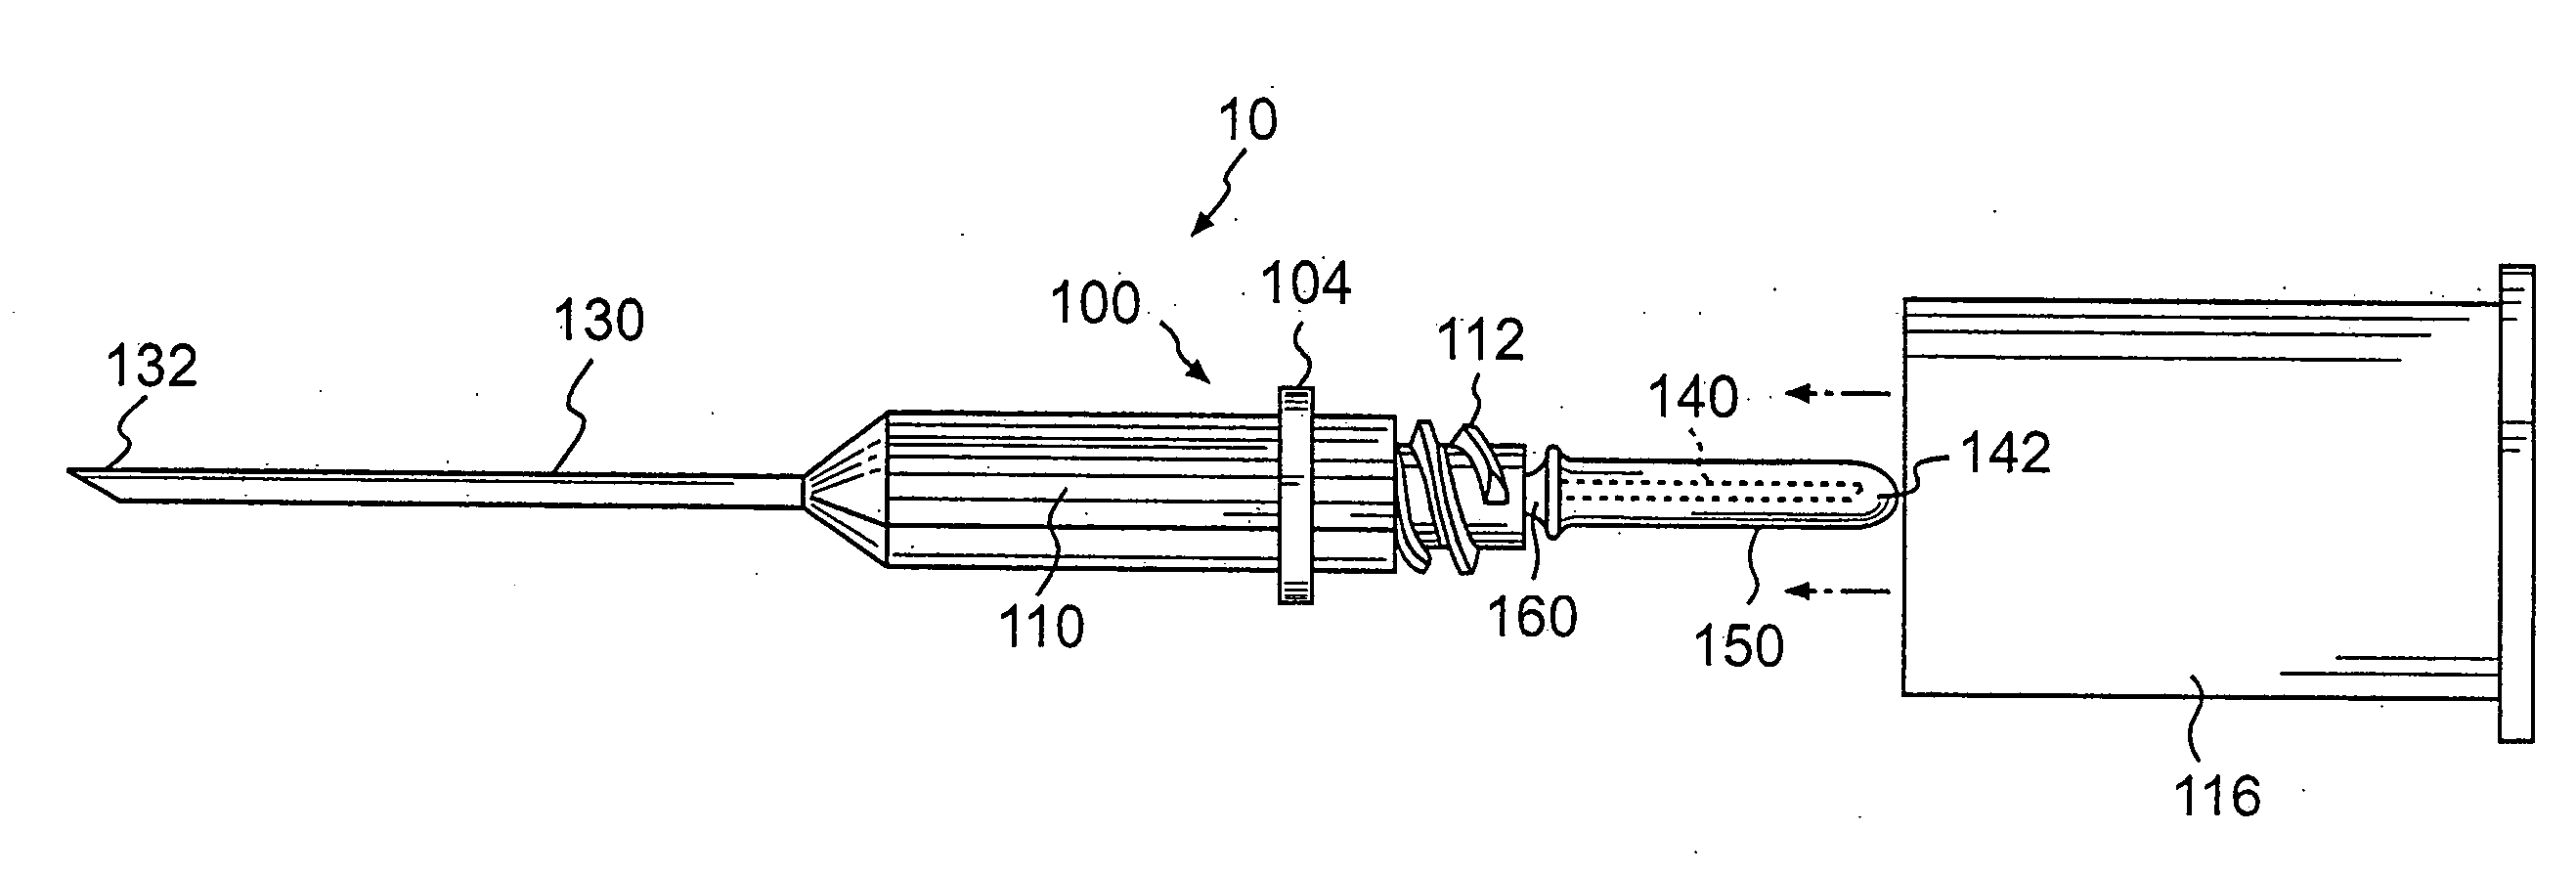 Blood drawing device with flash detection